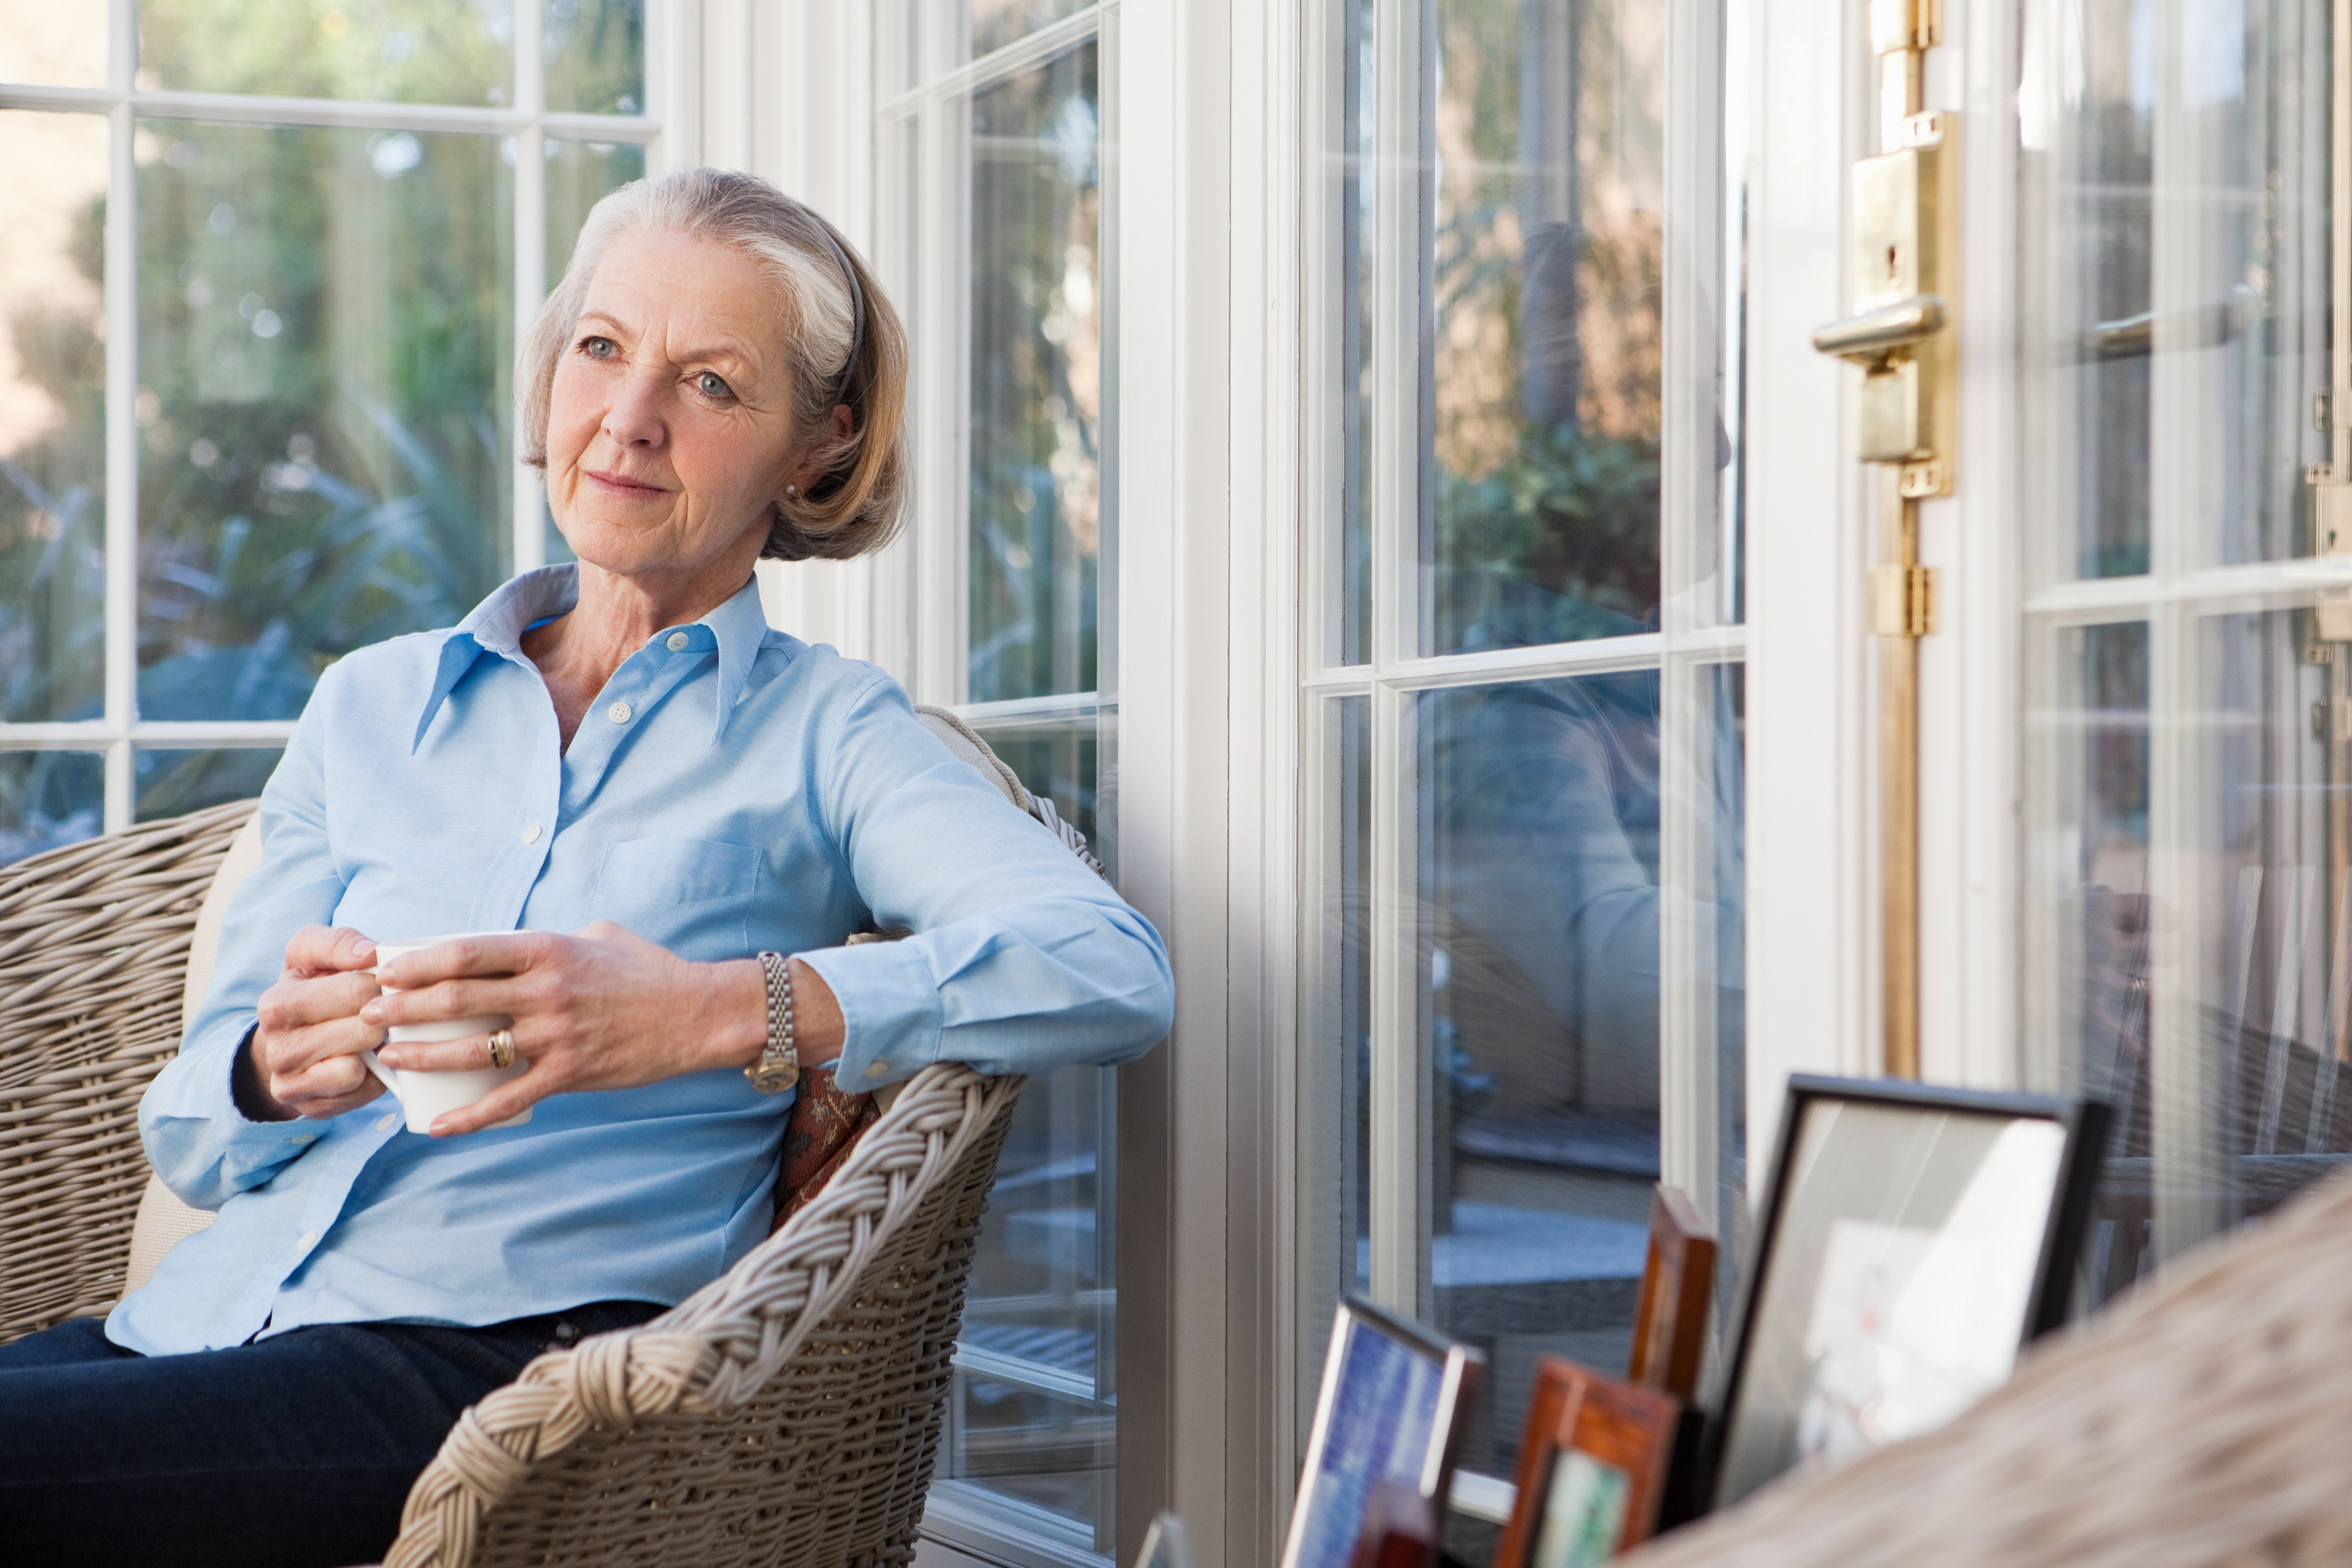 Senior woman relaxing with hot drink | Source: Getty Images